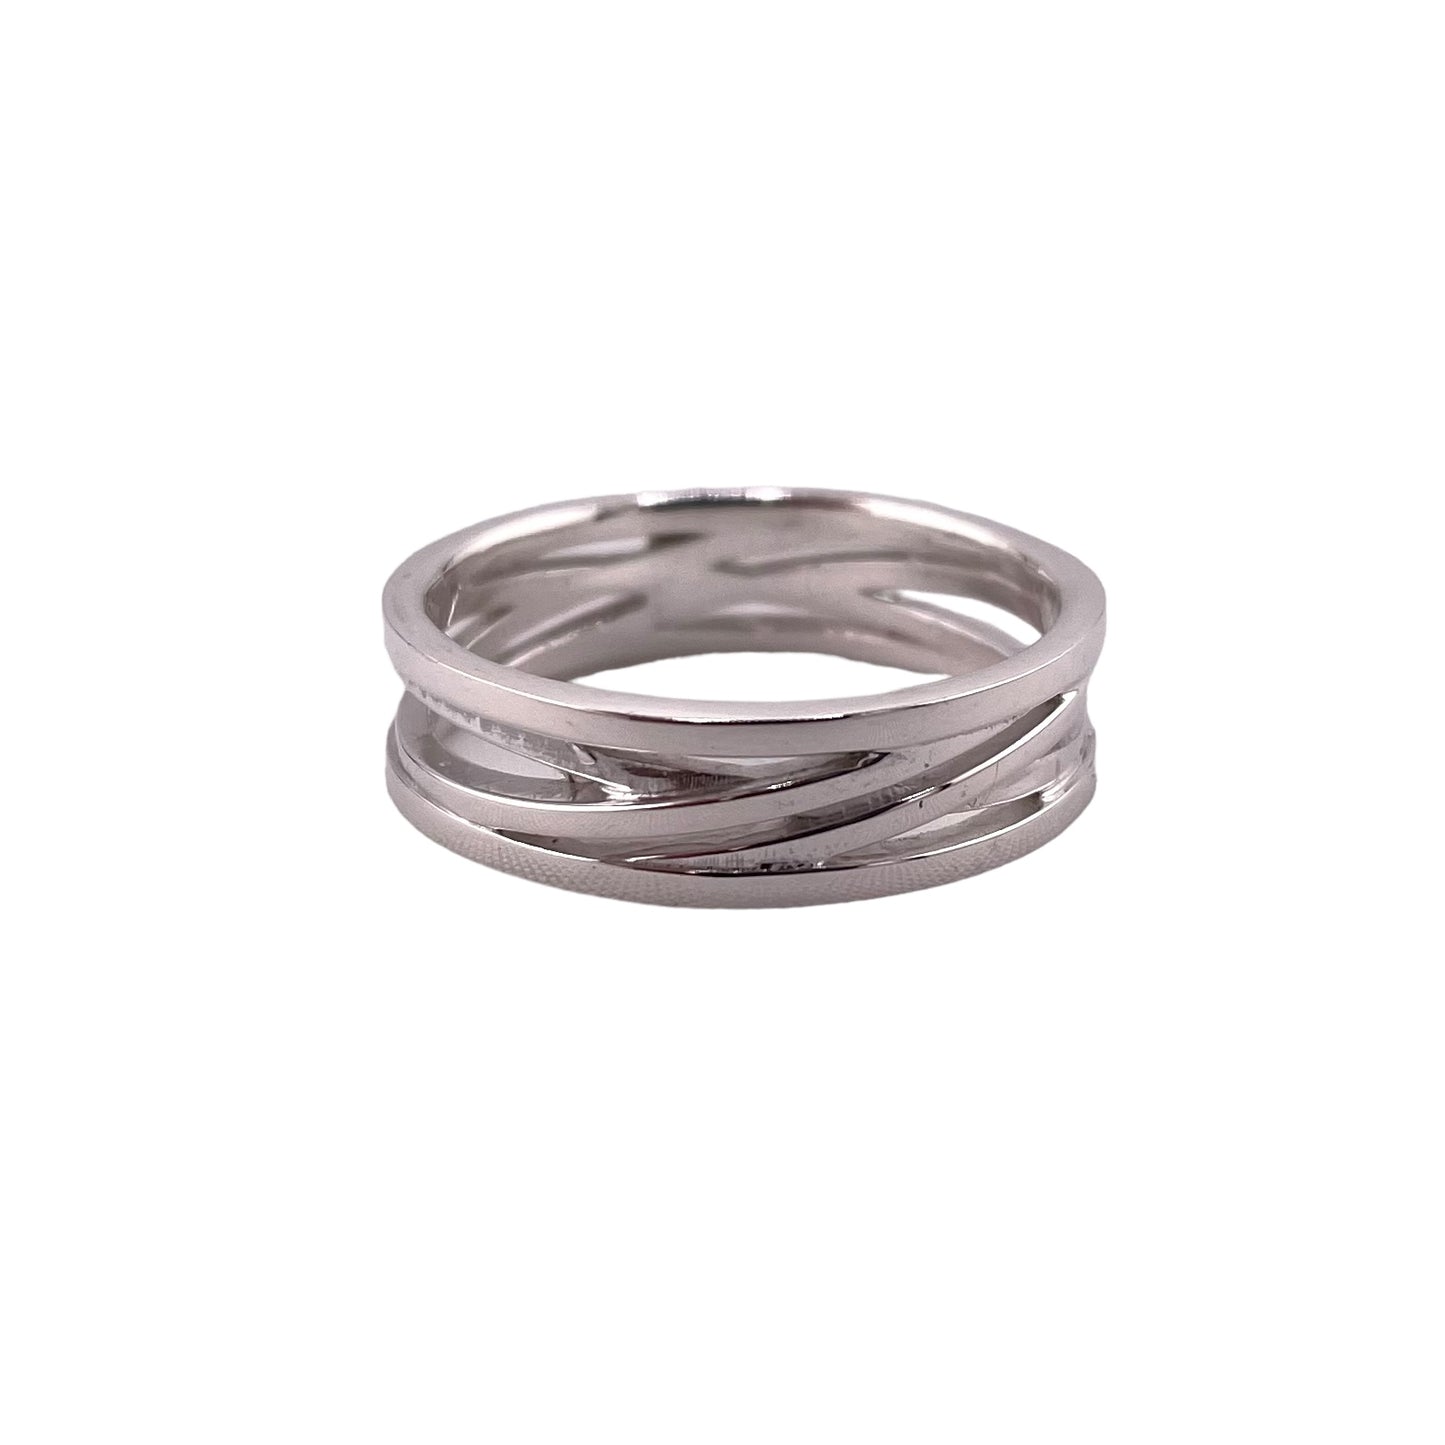 Criss Cross Band Ring Sterling Silver